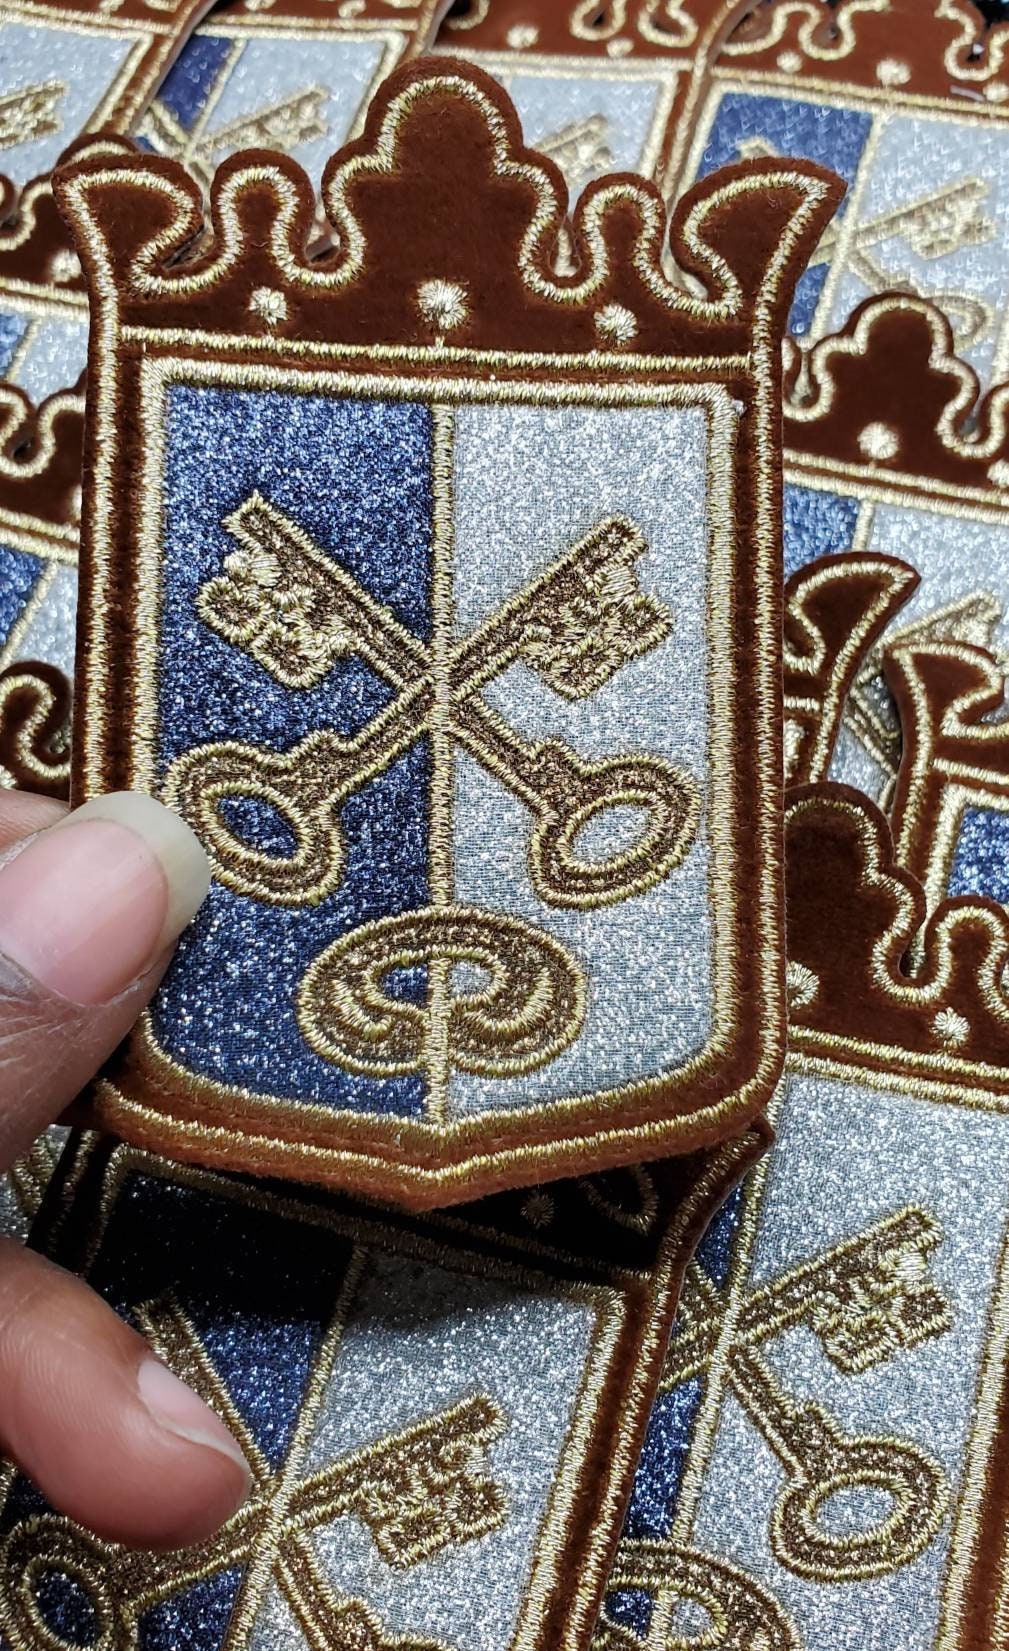 Royal, 1-pc "Gold Key" Gold, Silver, & Blue Metallic Royalty Crest with Brown Velvet, Small Emblem, Embroidered Patch, Iron-On, Size 3", DIY